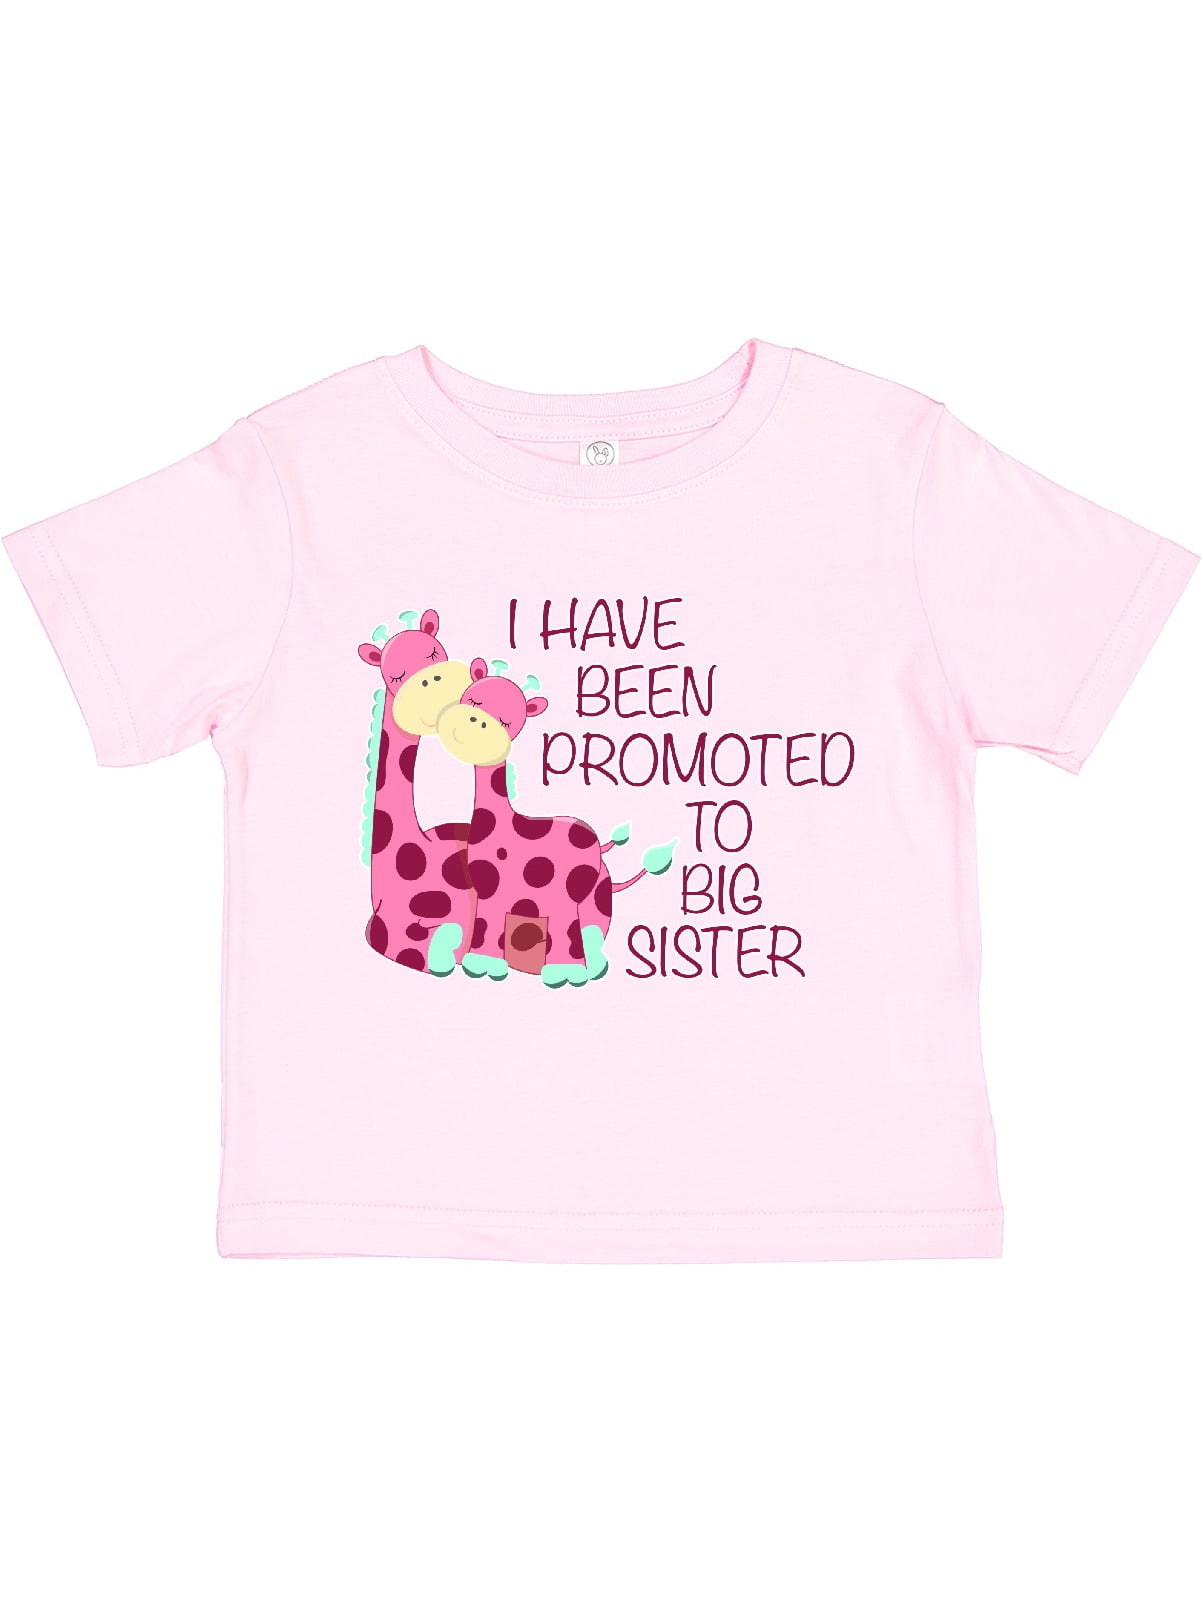 Kids Girls Promoted to BIG SISTER T-Shirt Casual Premium Childrens Tee Top Gift 